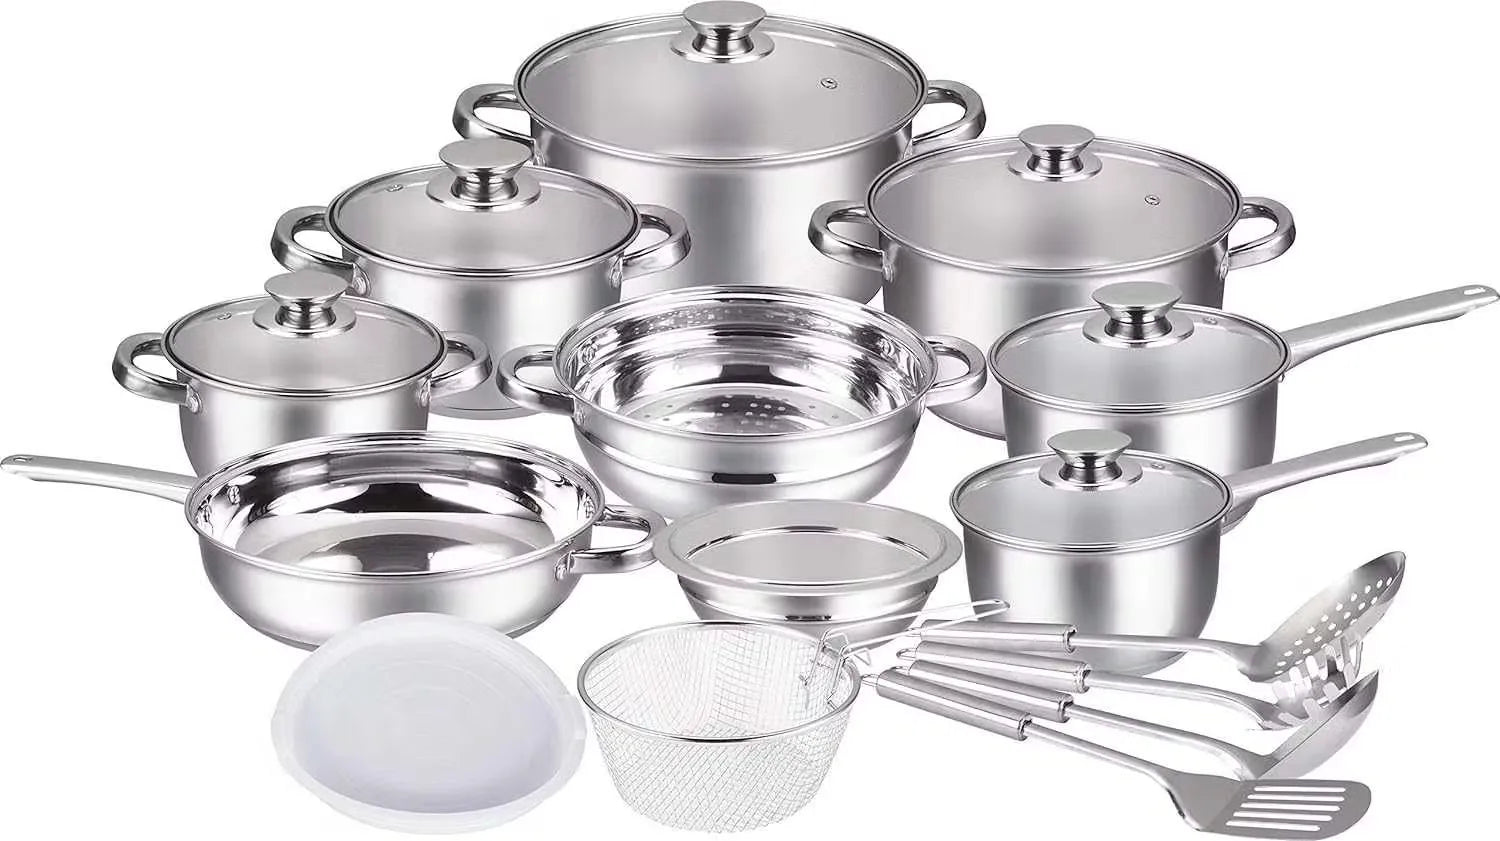 Upgrade your kitchen essentials with the Insiya 21-piece cookware set. Cook like a pro and enjoy healthy, delicious meals with ease. Insiya 21-piece stainless steel cookware set includes list of included items. Dishwasher safe and suitable for most stovetops.